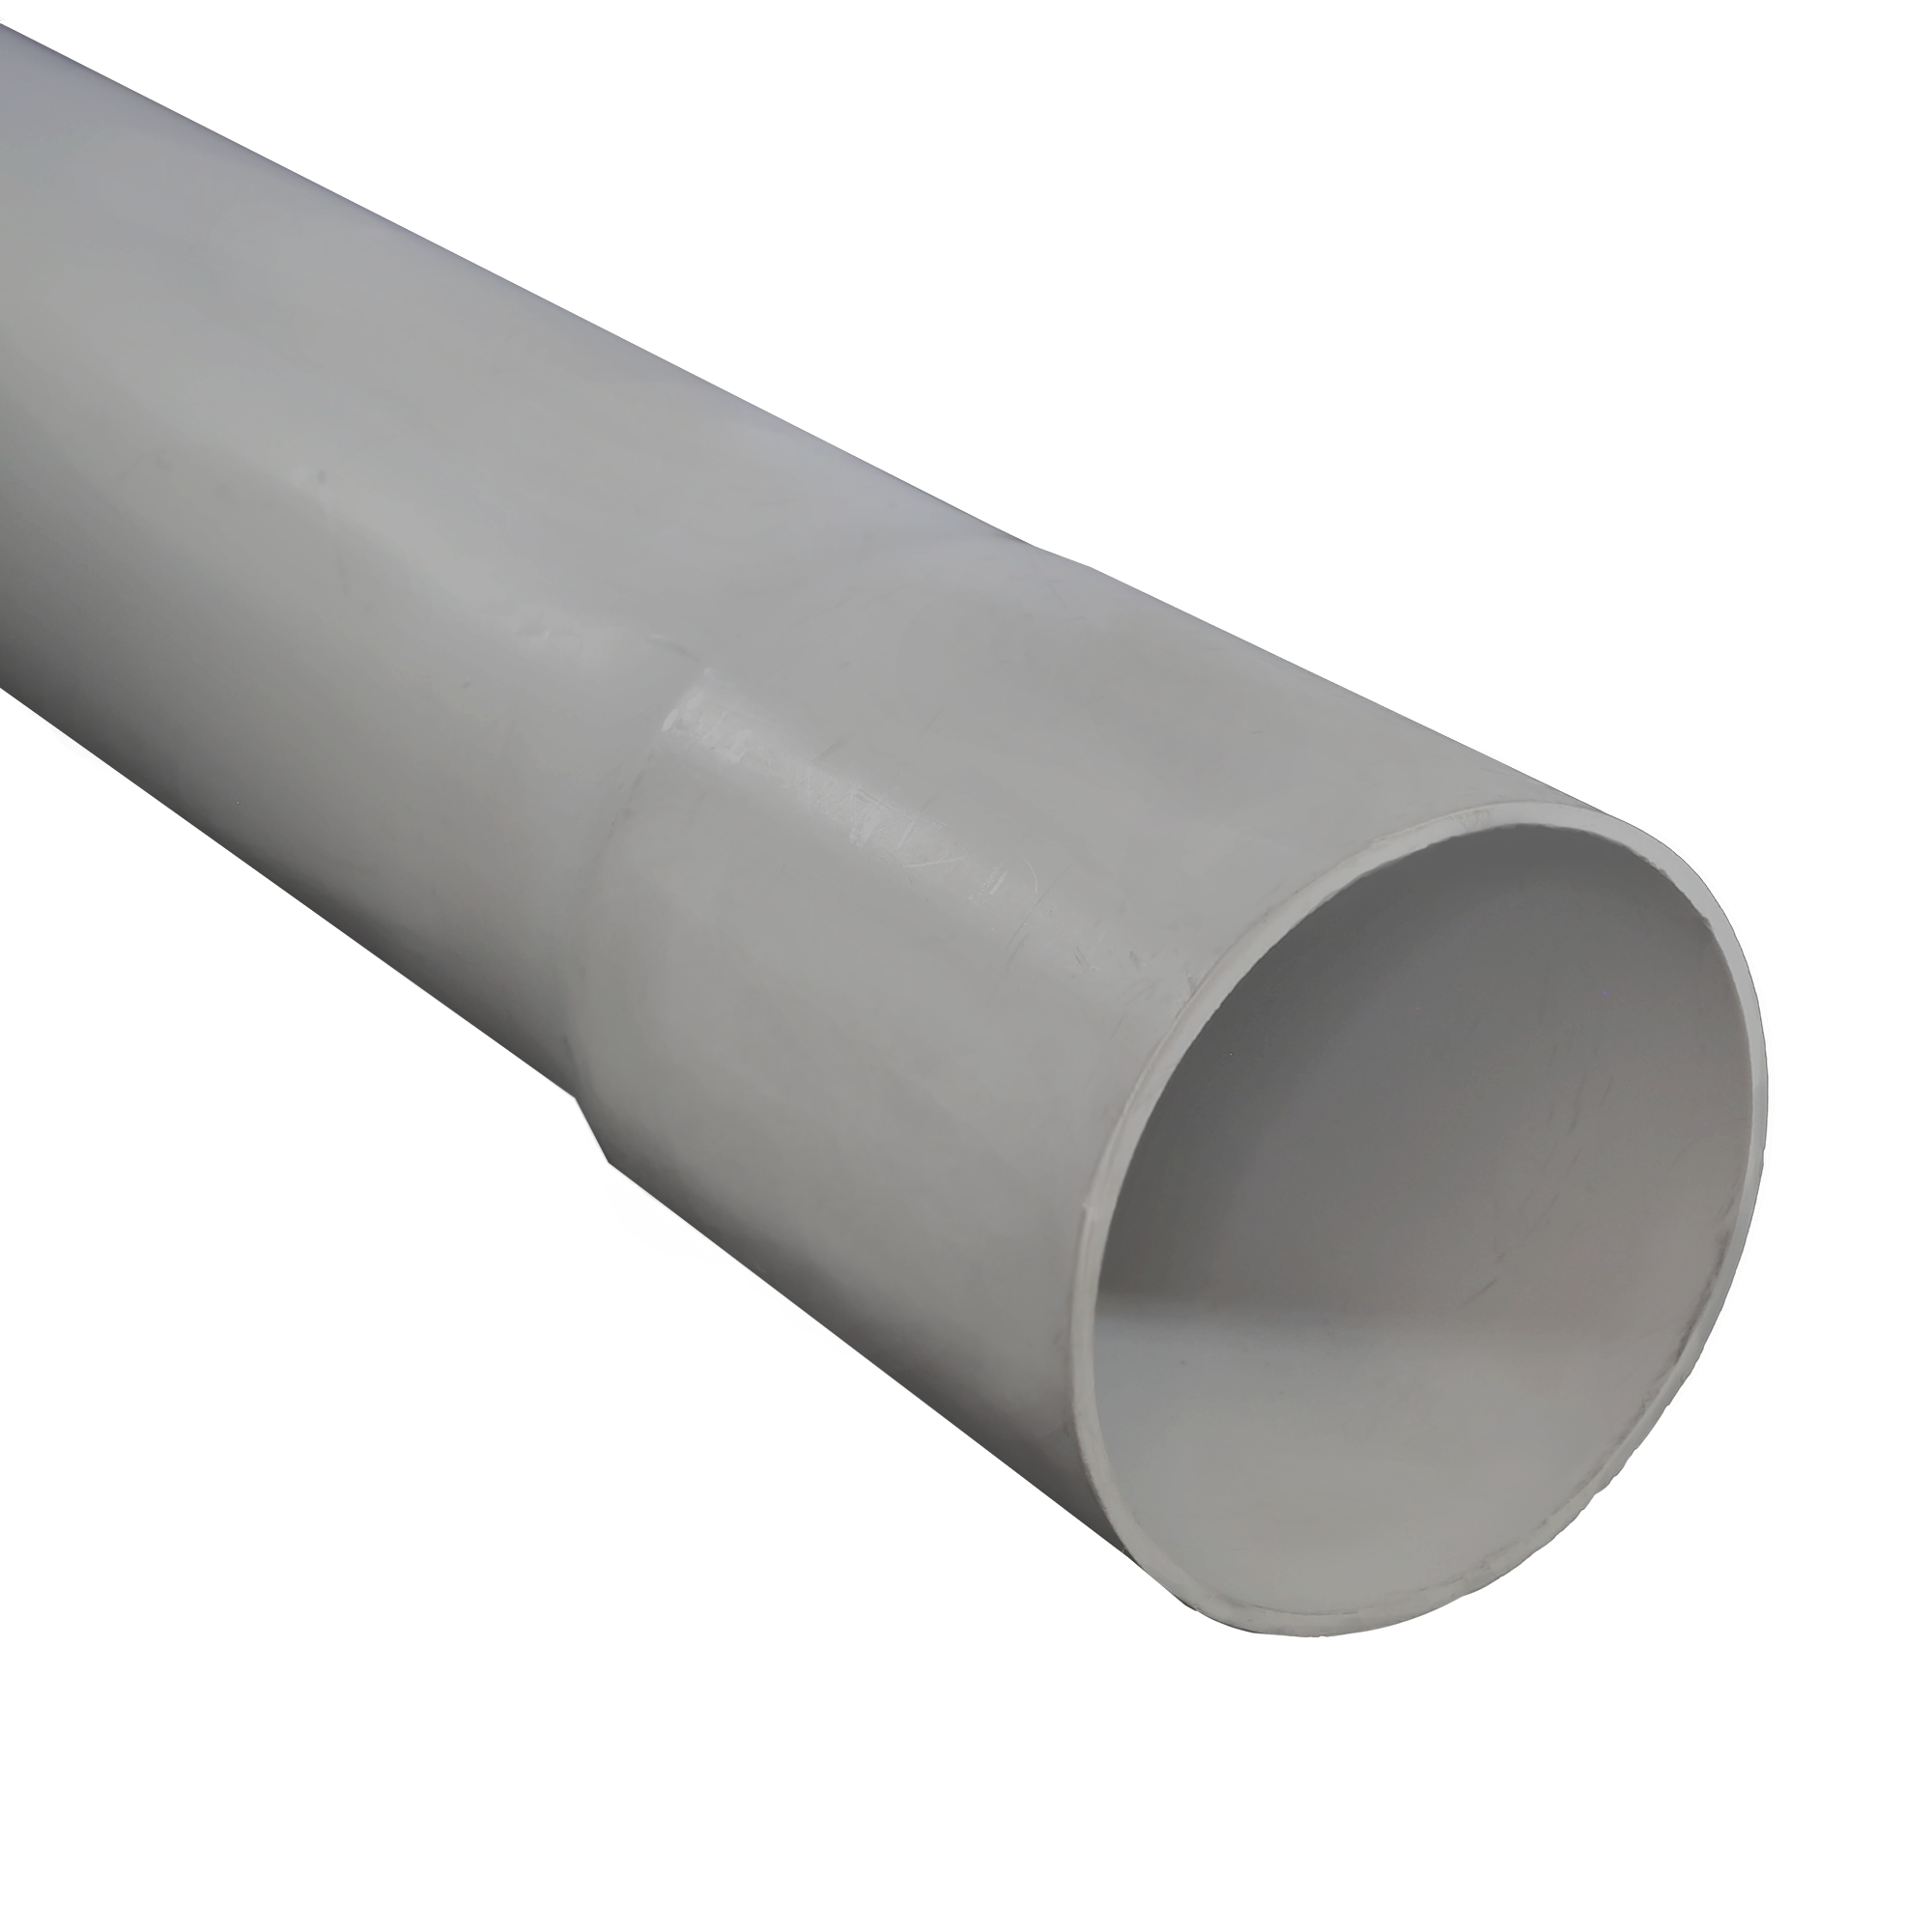 5 in. x 20 ft. EB-35 PVC Utility Duct